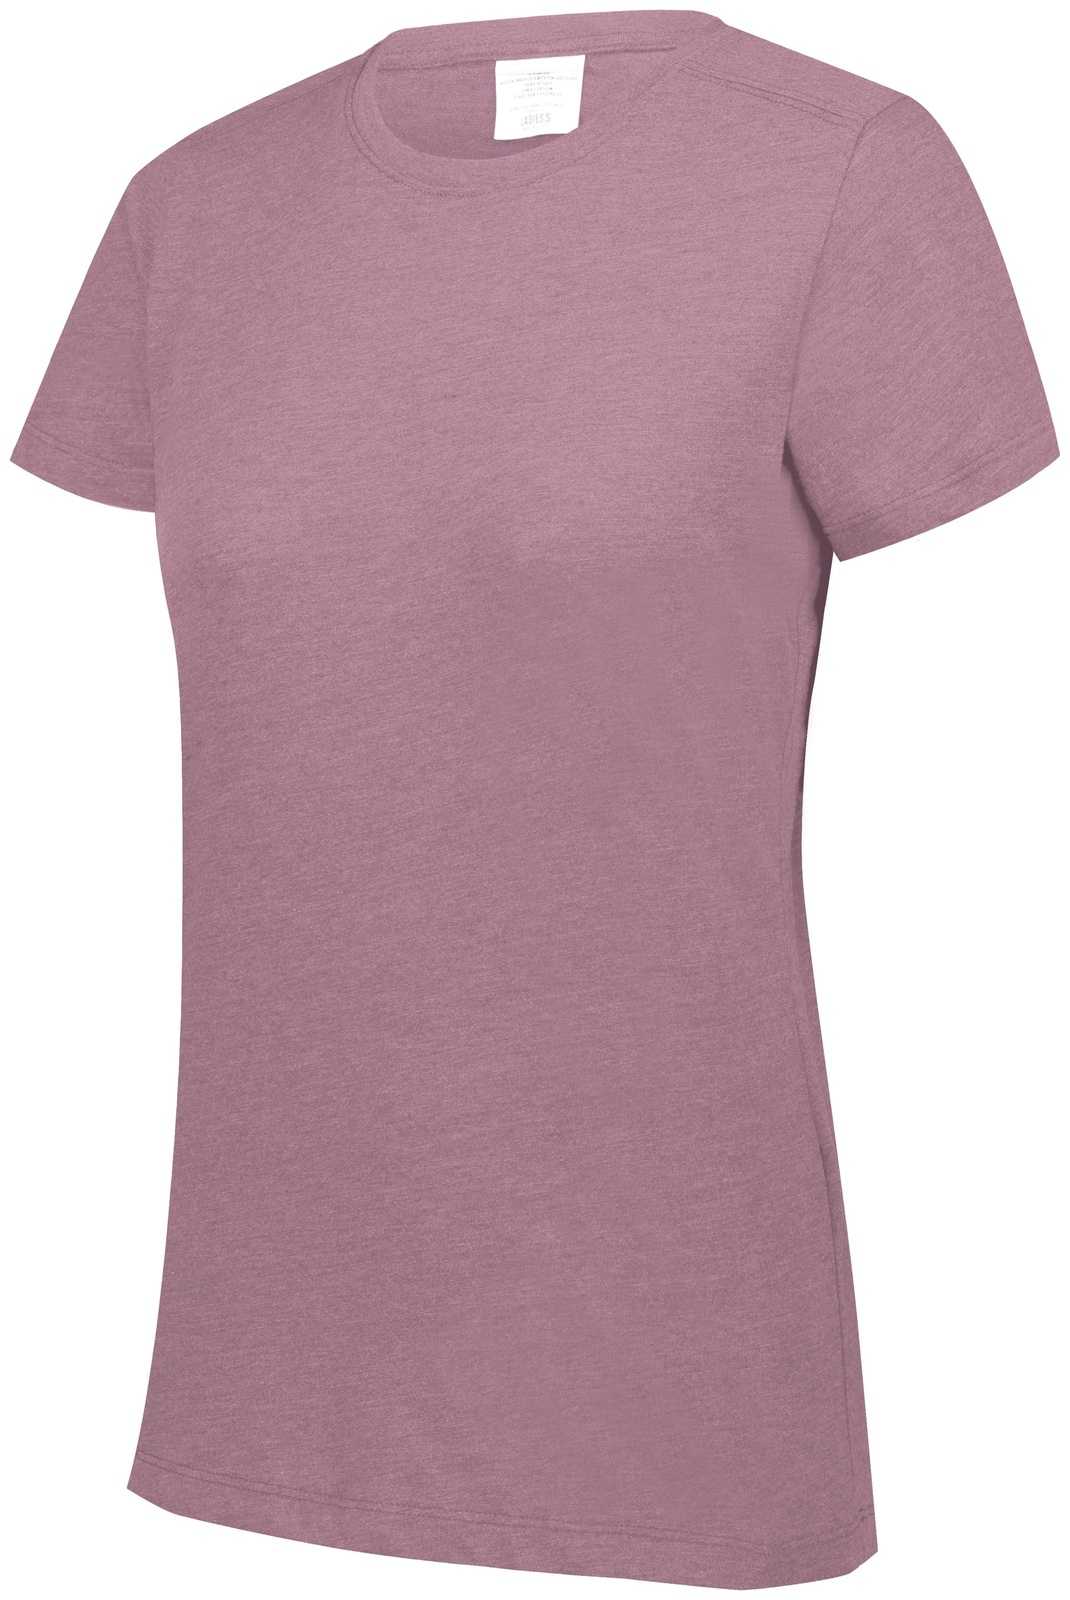 Augusta 3067 Ladies Tri-Blend T-Shirt - Dusty Rose Heather - HIT a Double